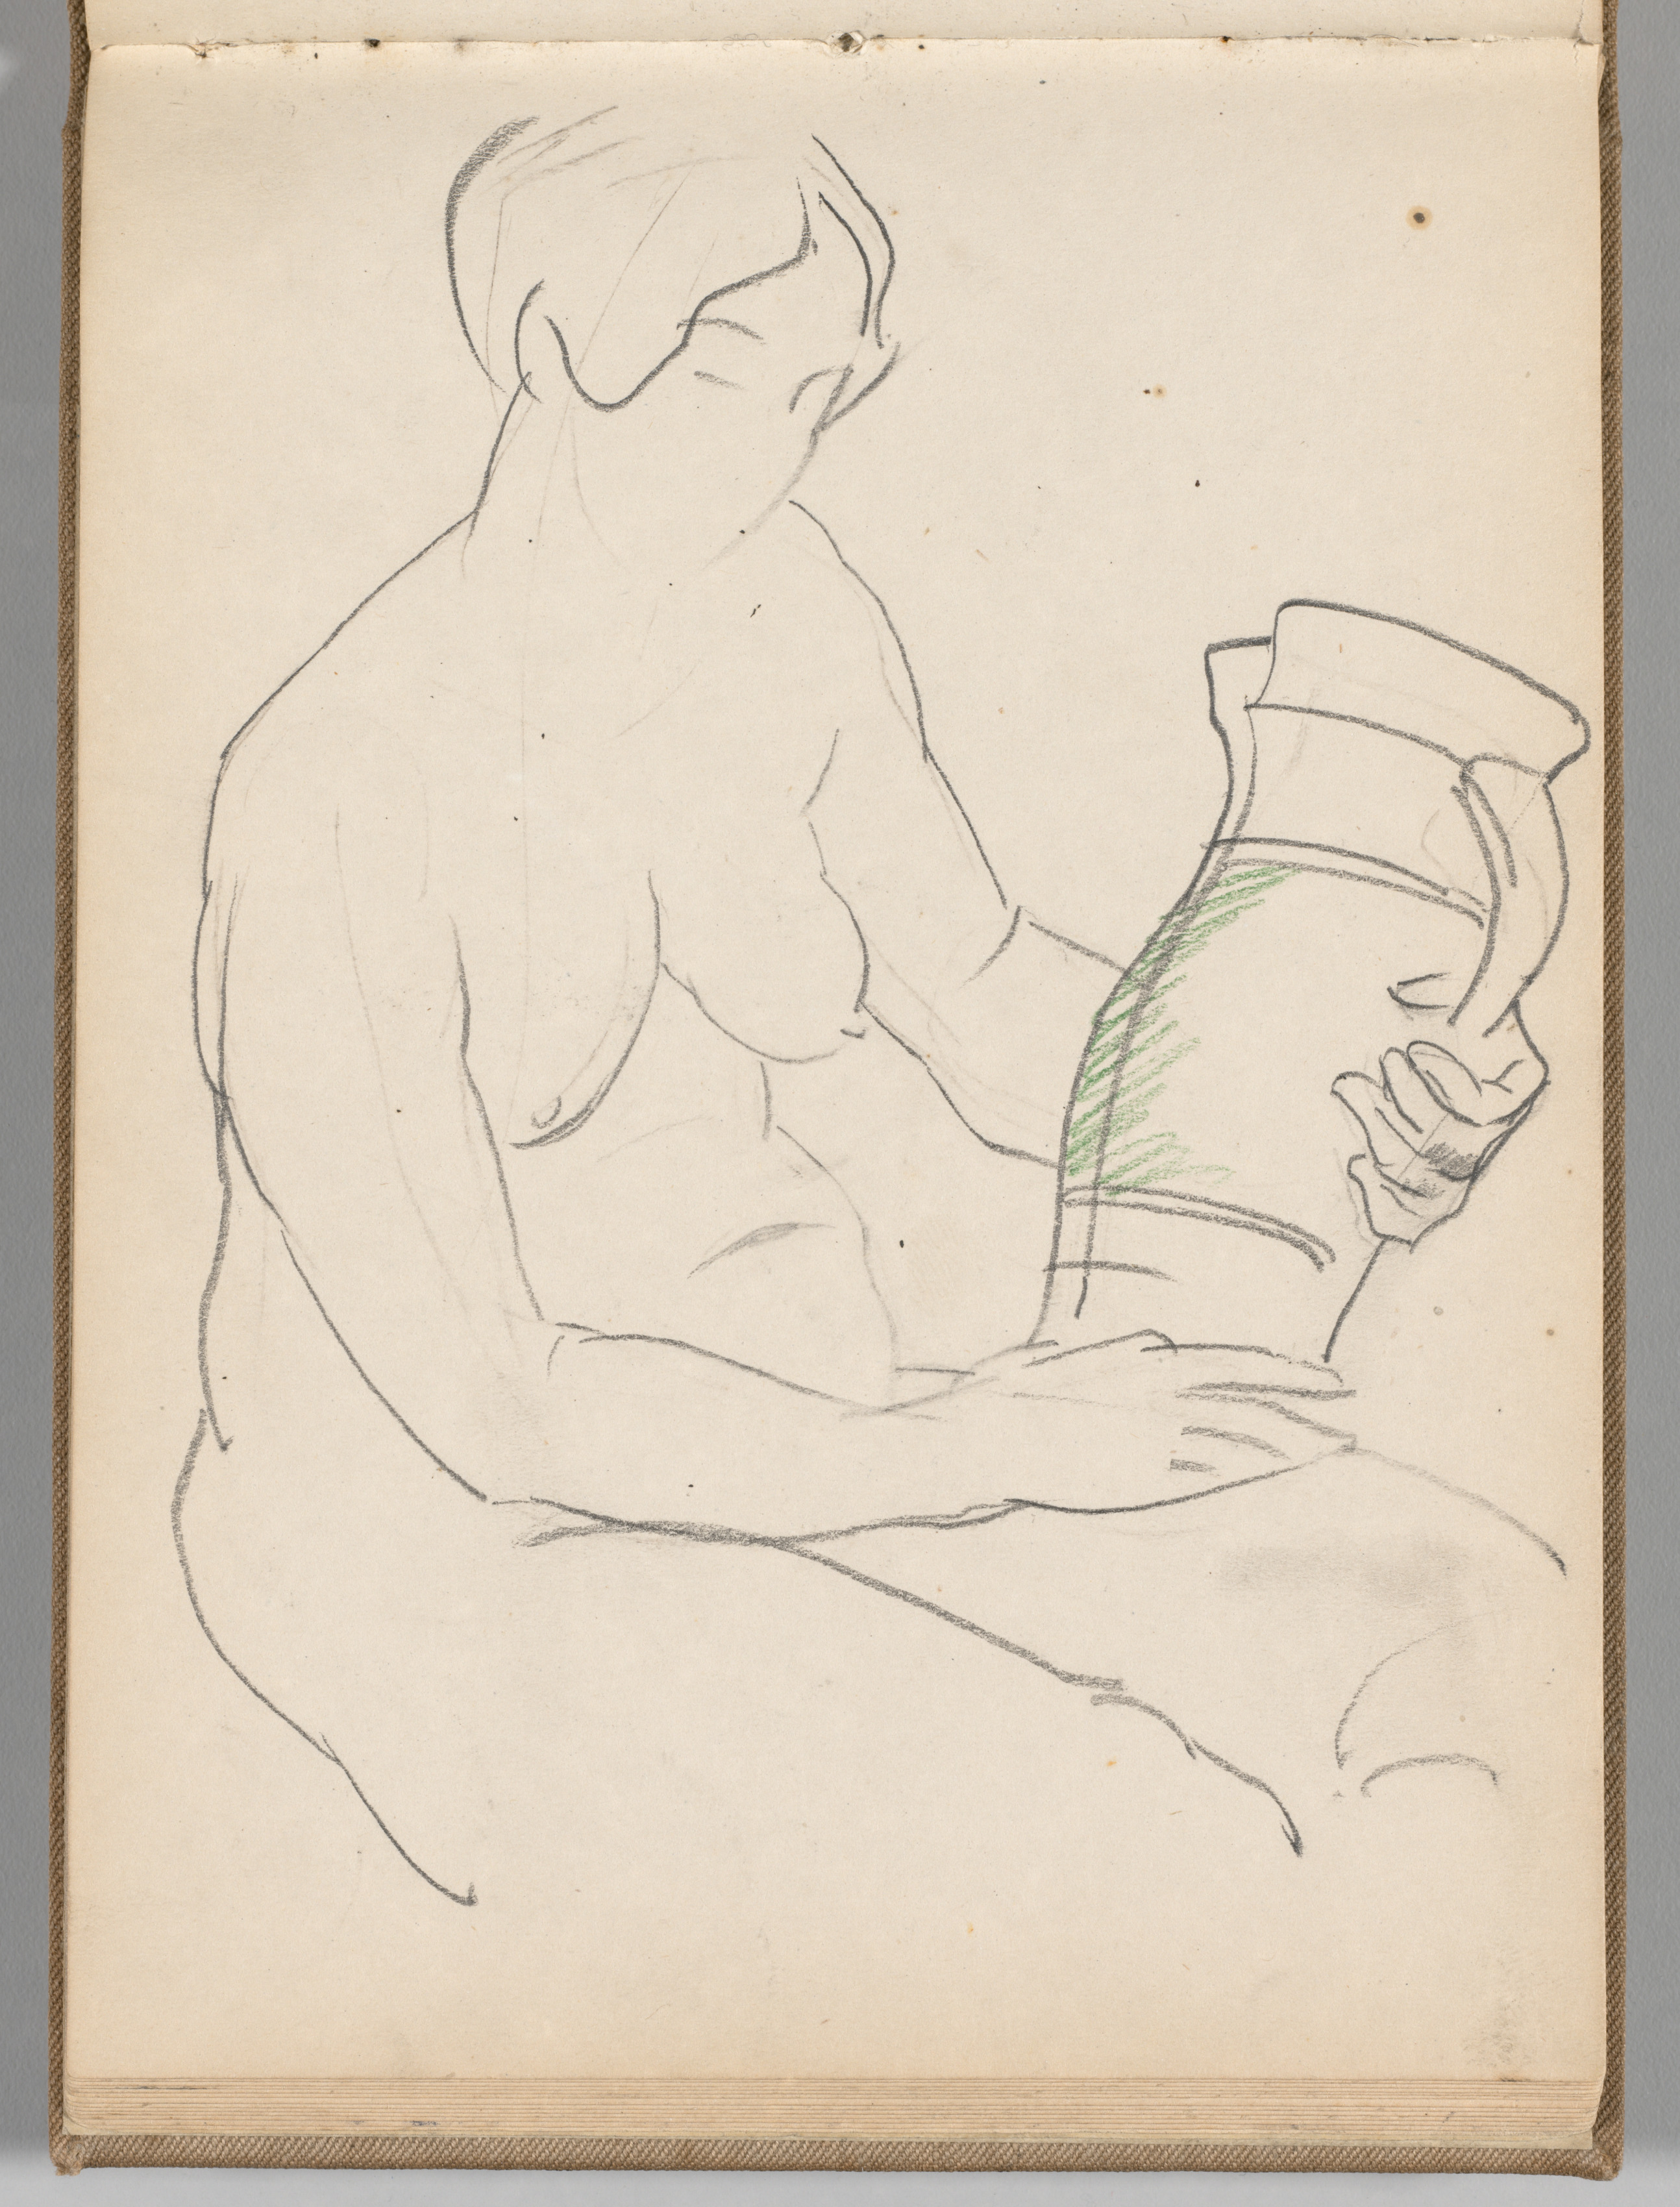 Sketchbook, Spain: Page 30: Sketch of a Nude Woman Holding a Pitcher, c. 1922